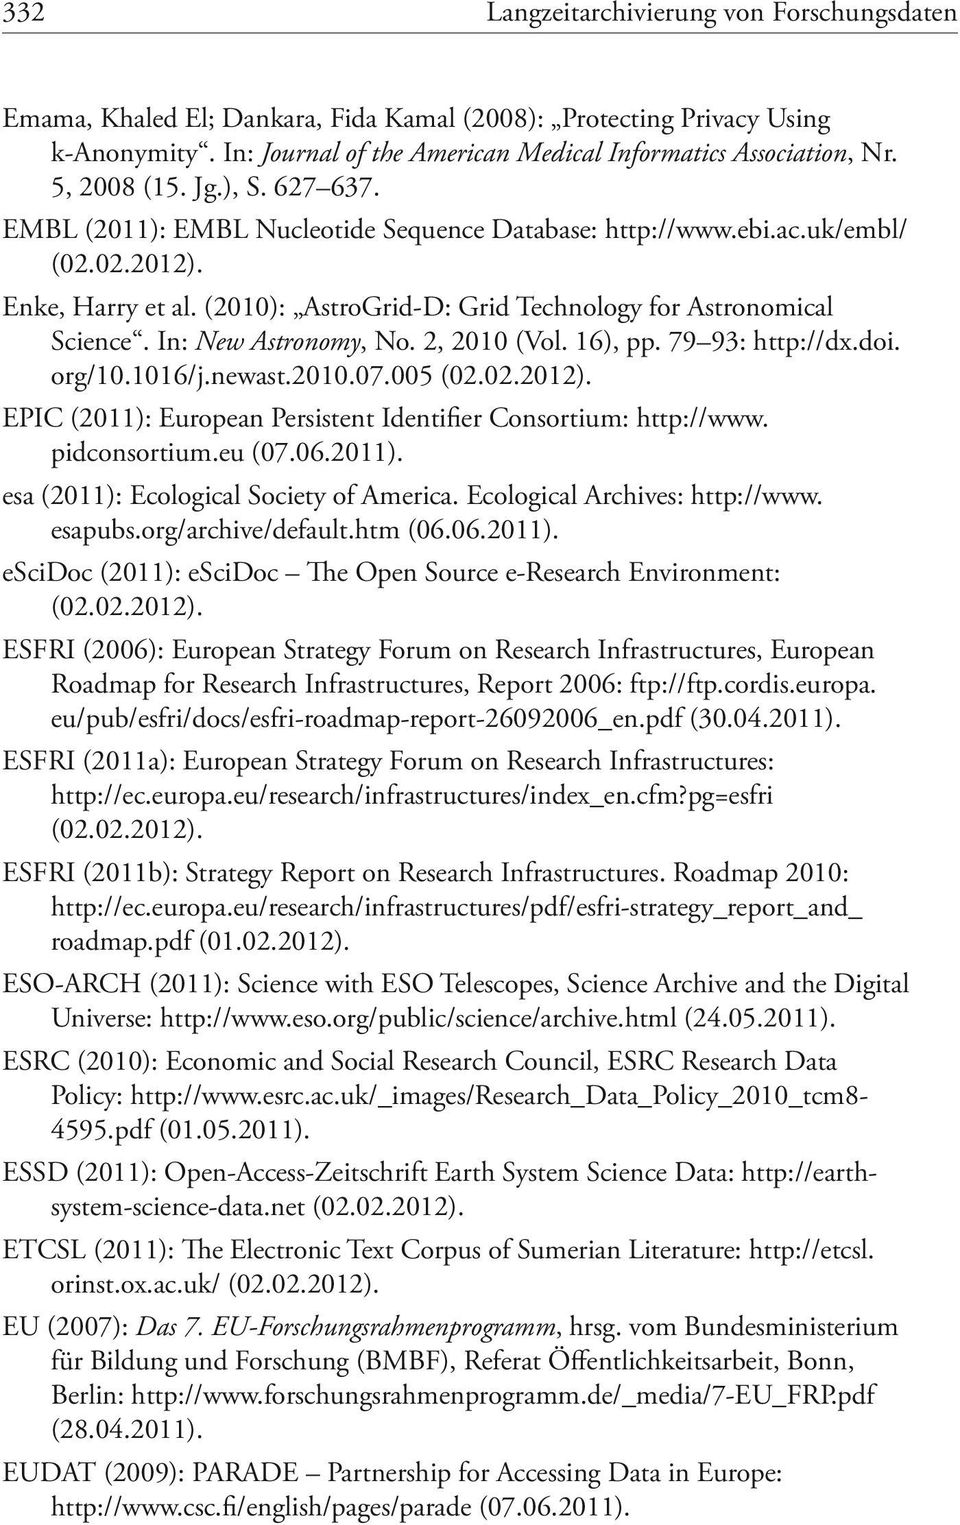 (2010): AstroGrid-D: Grid Technology for Astronomical Science. In: New Astronomy, No. 2, 2010 (Vol. 16), pp. 79 93: http://dx.doi. org/10.1016/j.newast.2010.07.005 (02.02.2012).